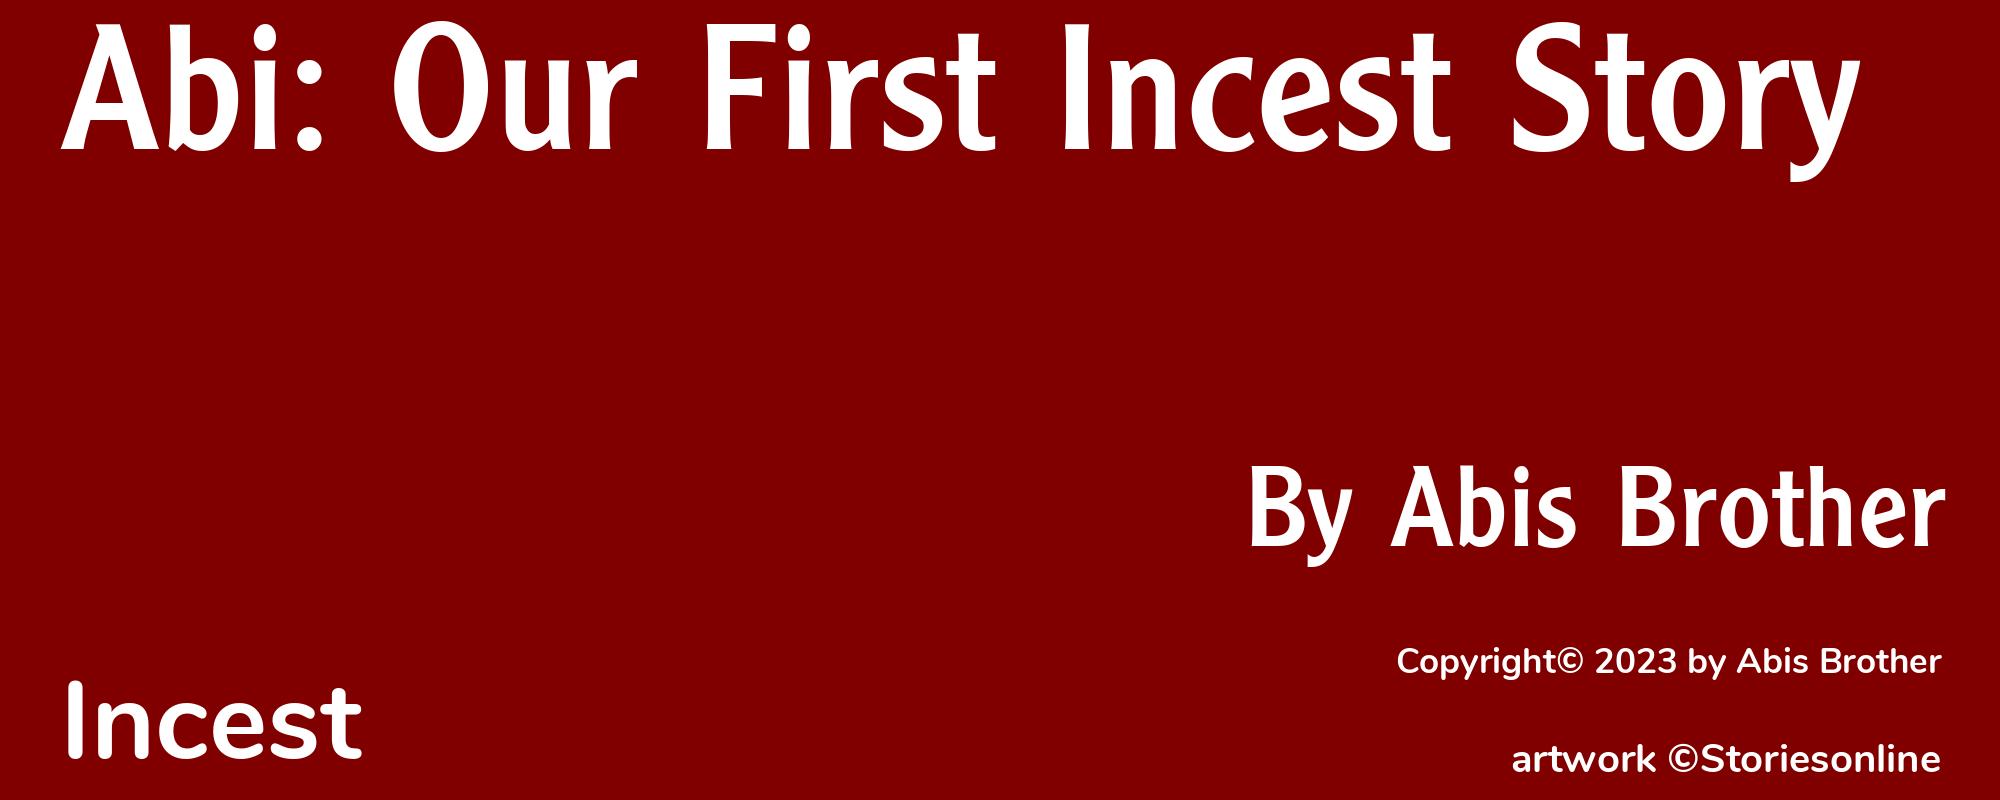 Abi: Our First Incest Story - Cover